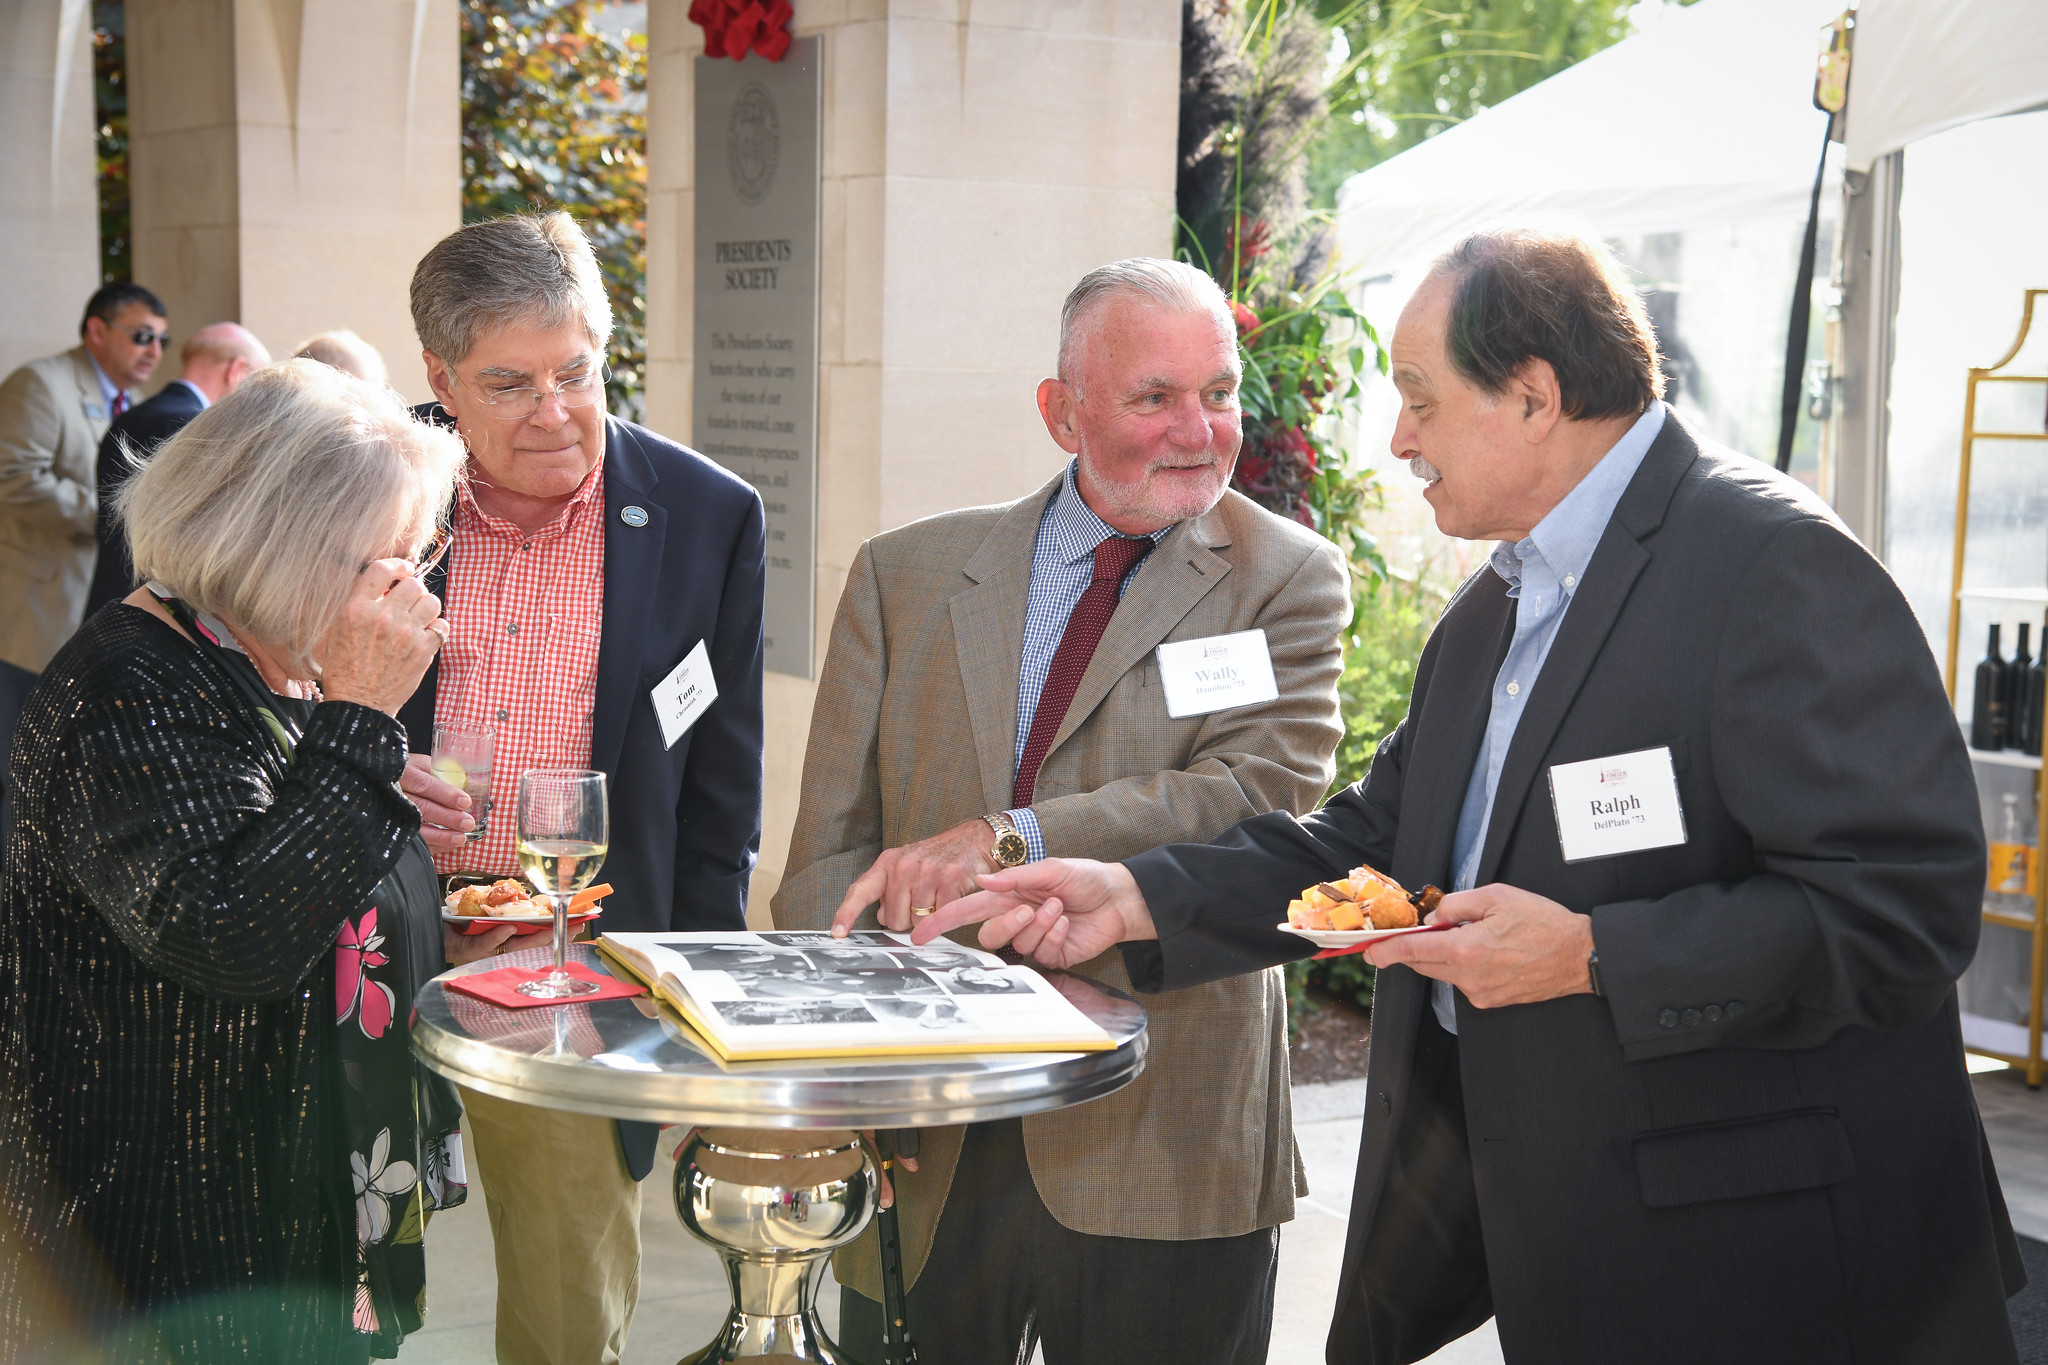 Alumni celebrating their 50th reunion reminisce together